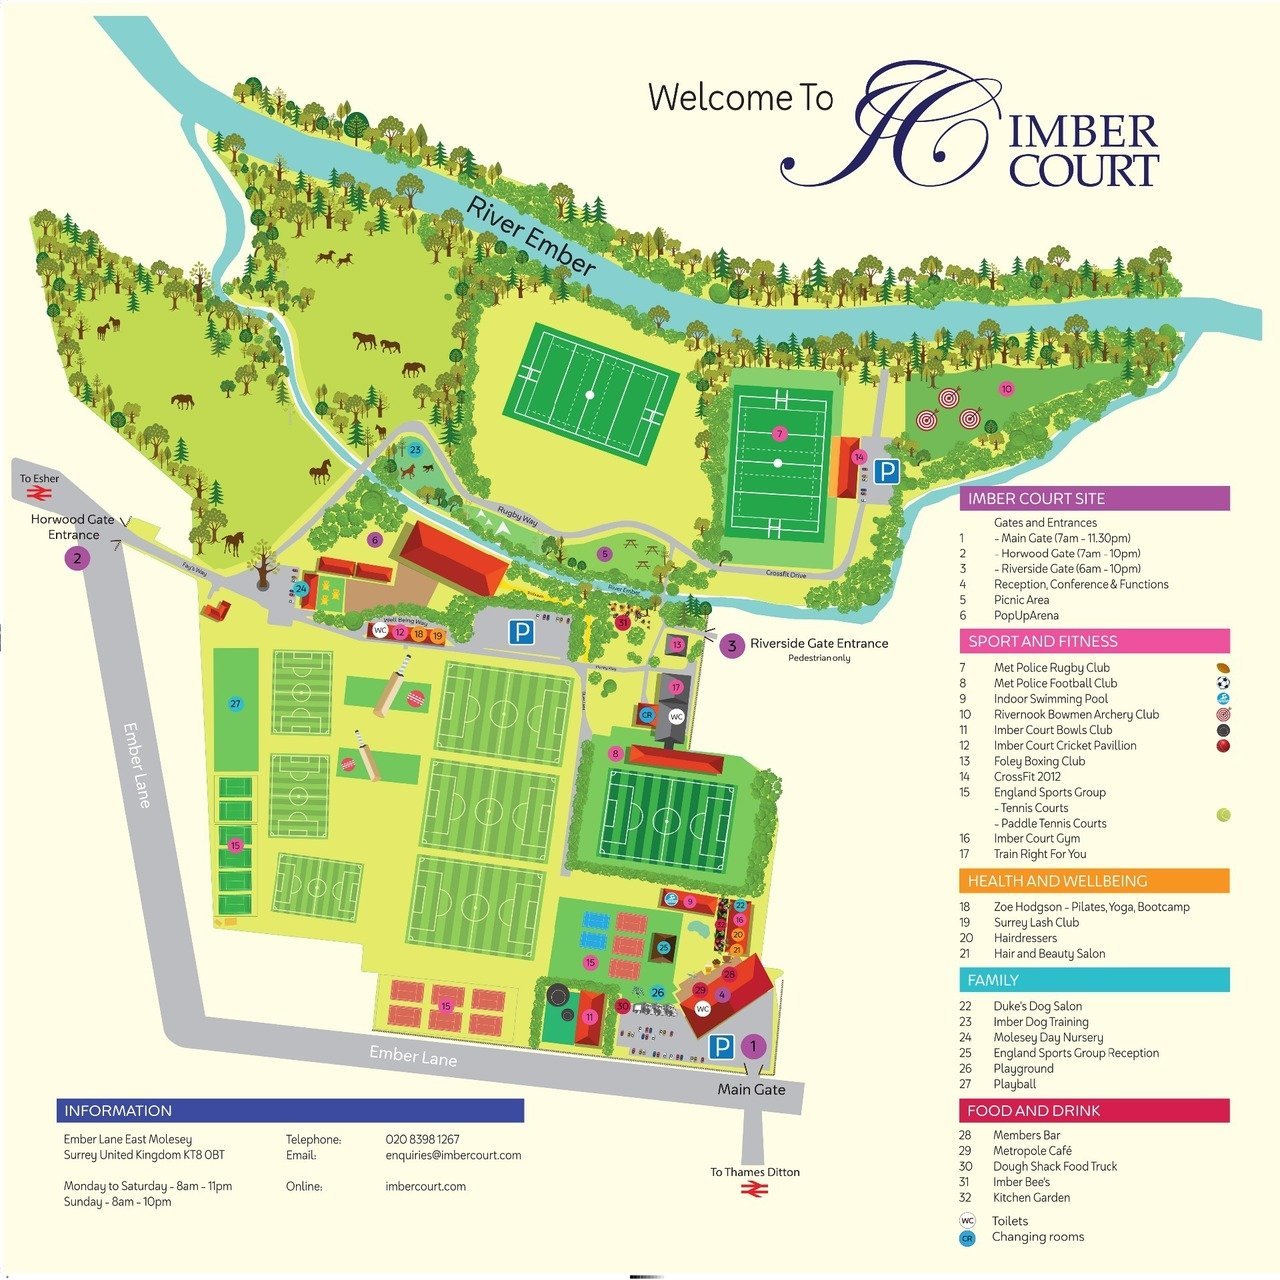 map of the imber court grounds